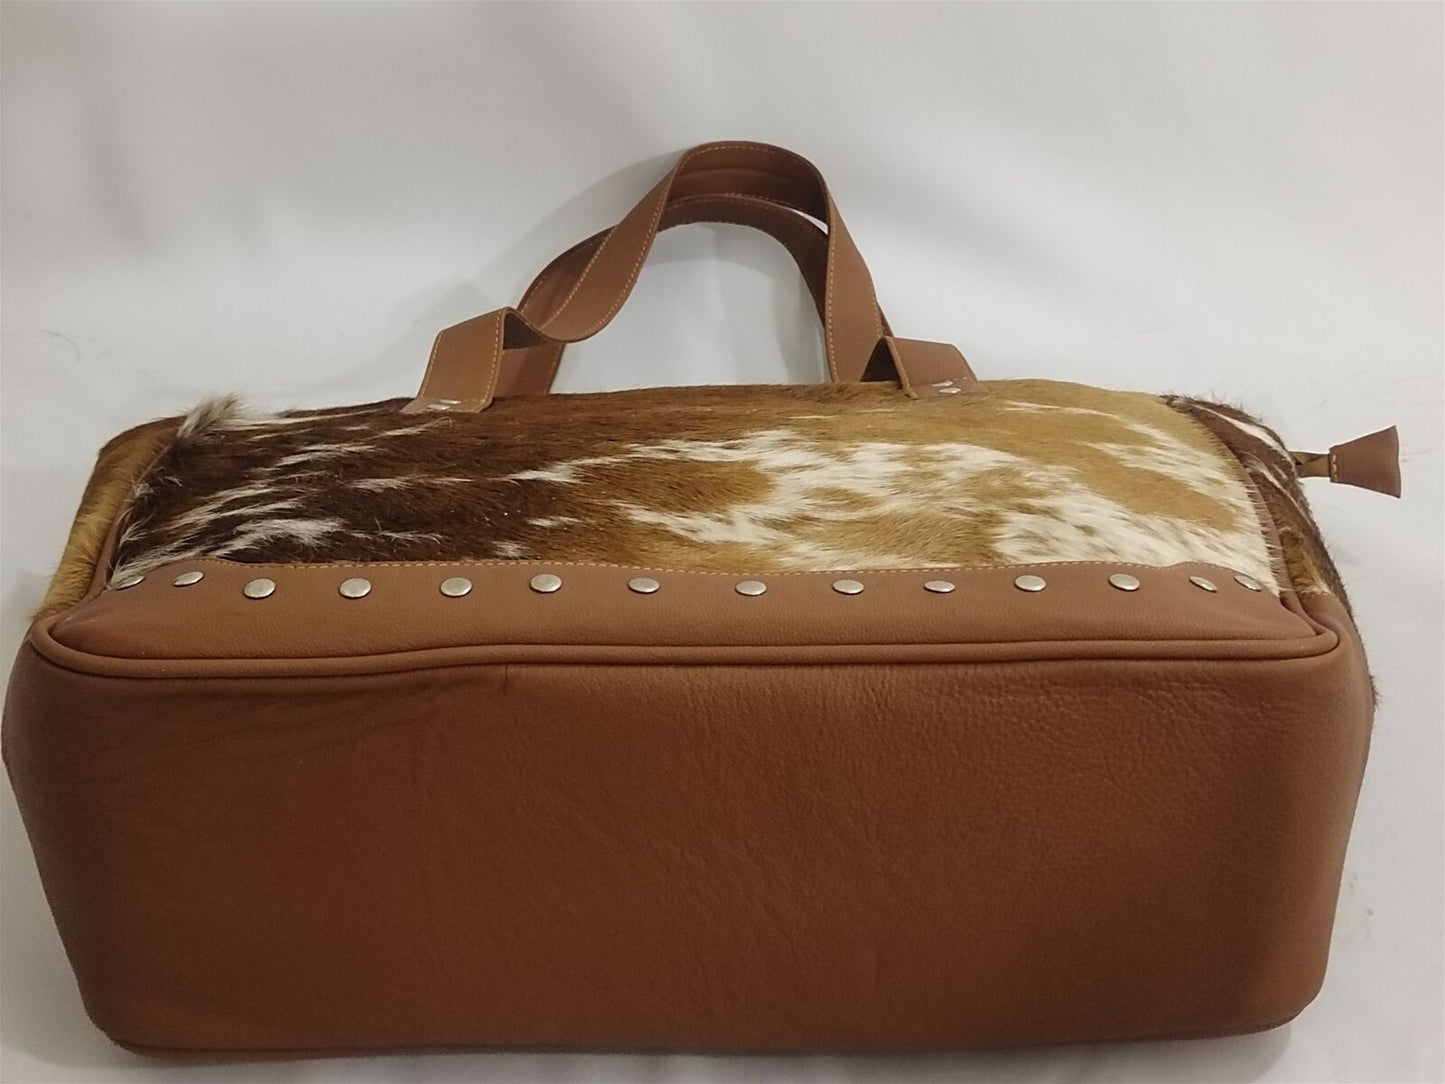 Large Brown White Cowhide Tote Purse